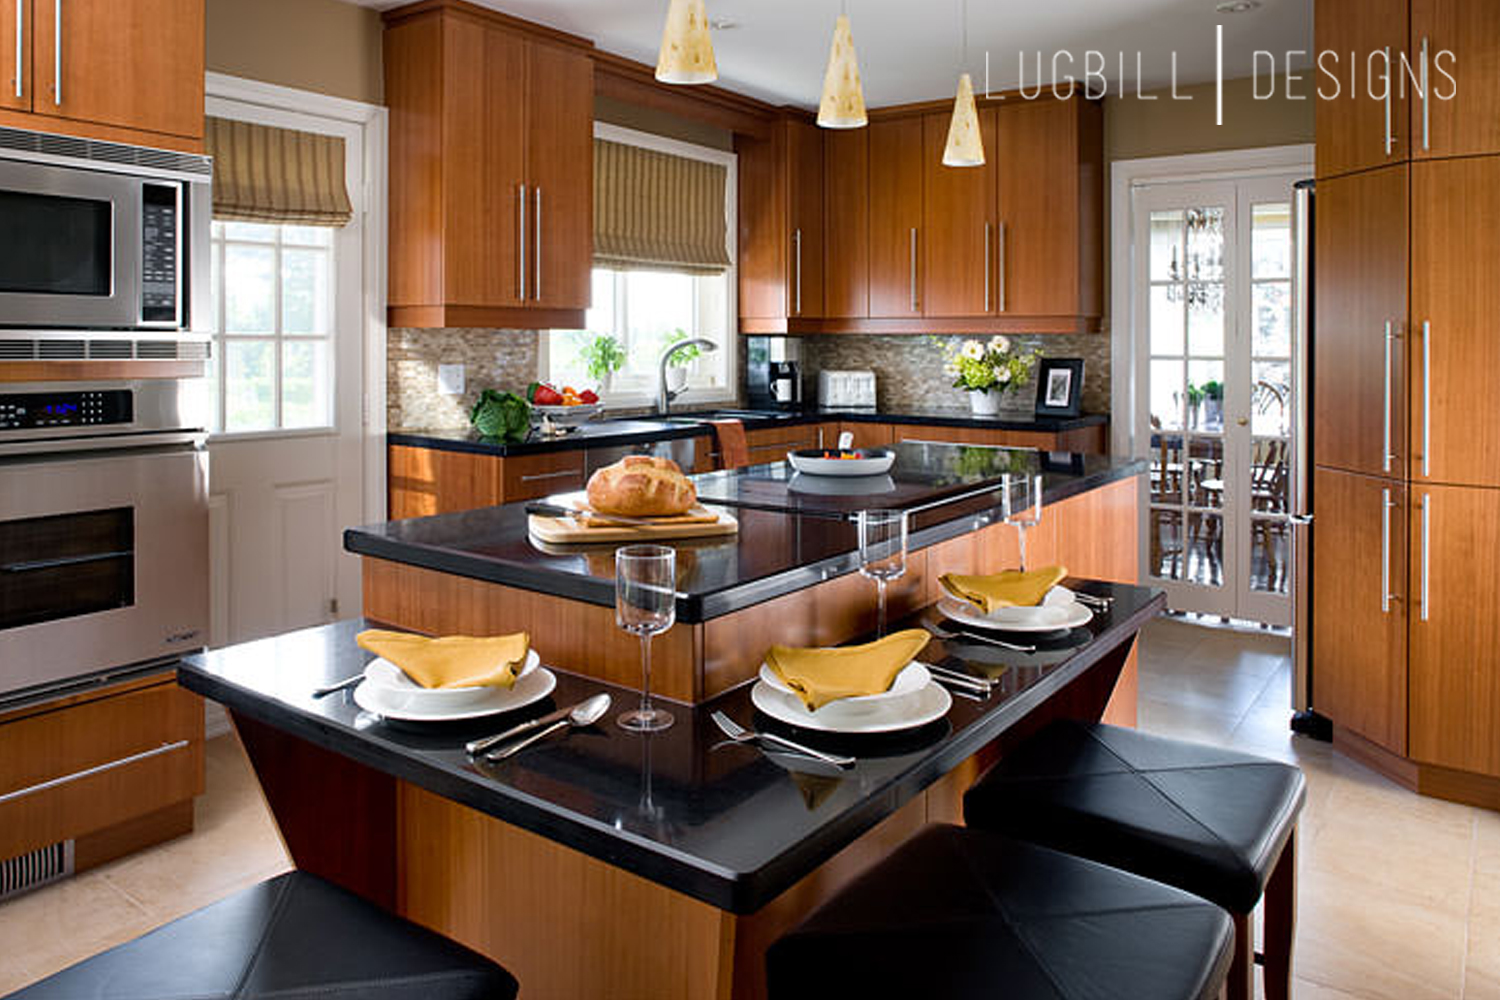 Top 50 Kitchen Design Ideas | Two in One | Kitchen + Dining - Lugbill